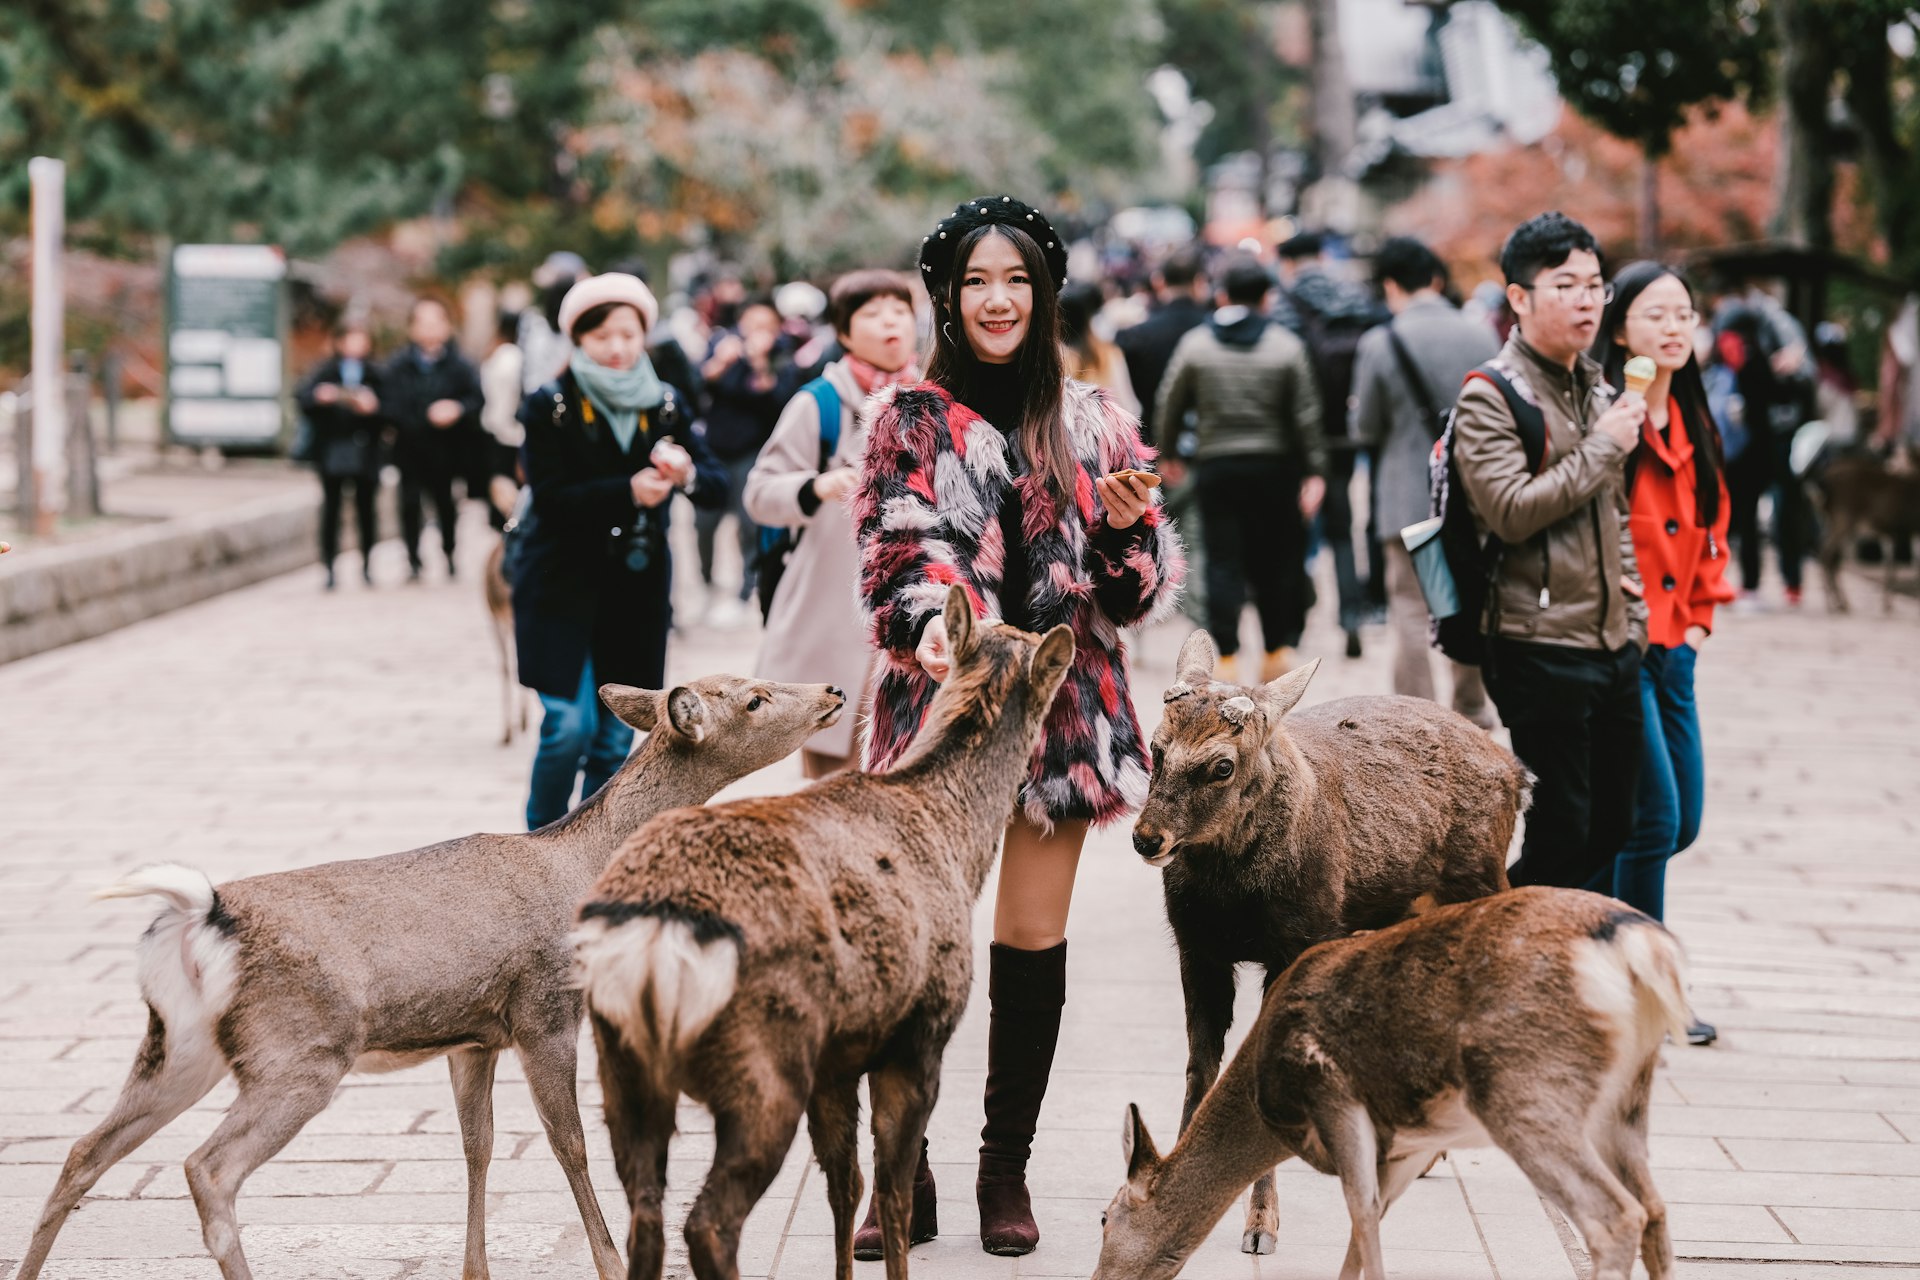 A woman surrounded by deer in Nara, Japan